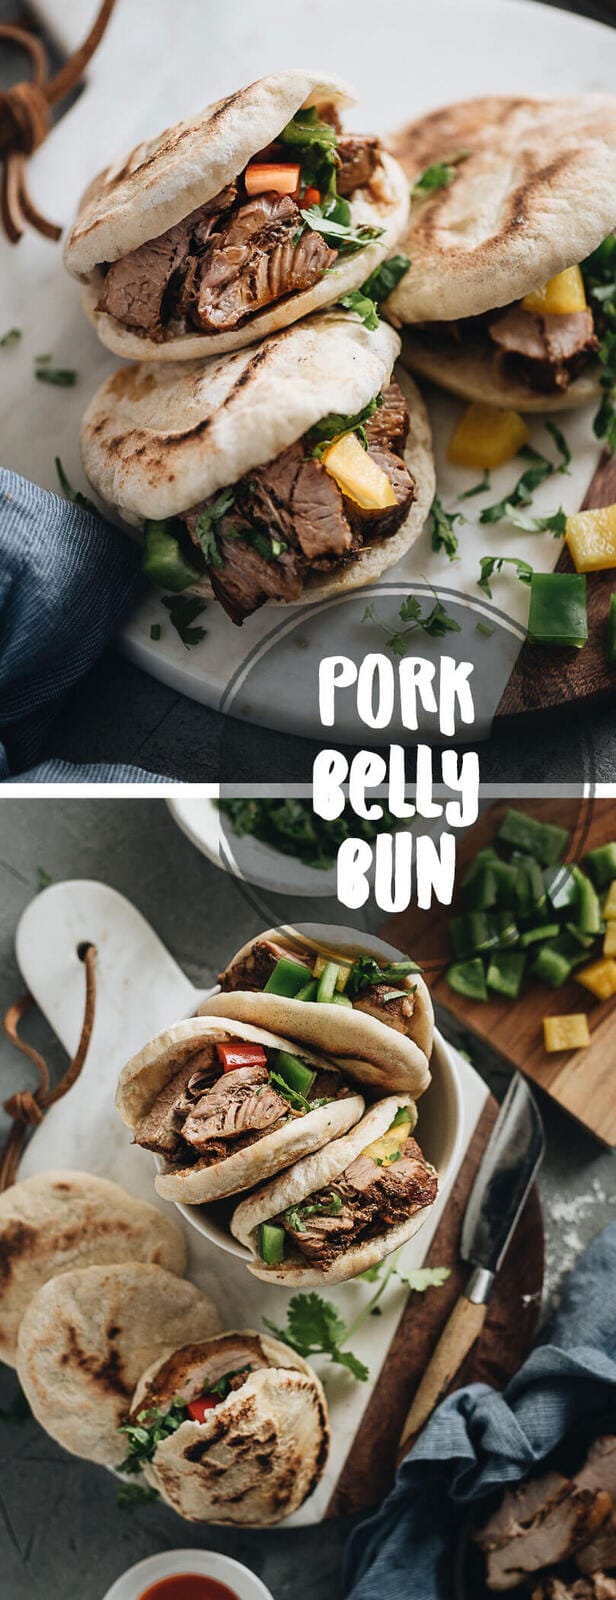 Chinese pork belly bun (Rou Jia Mo, 肉夹馍) - Melt-in-your-mouth braised pork belly stuffed with peppers and cilantro in a fluffy flatbread. They are so irresistible! {Gluten-Free adaptable} #pork #burger #chinese #asian #recipes